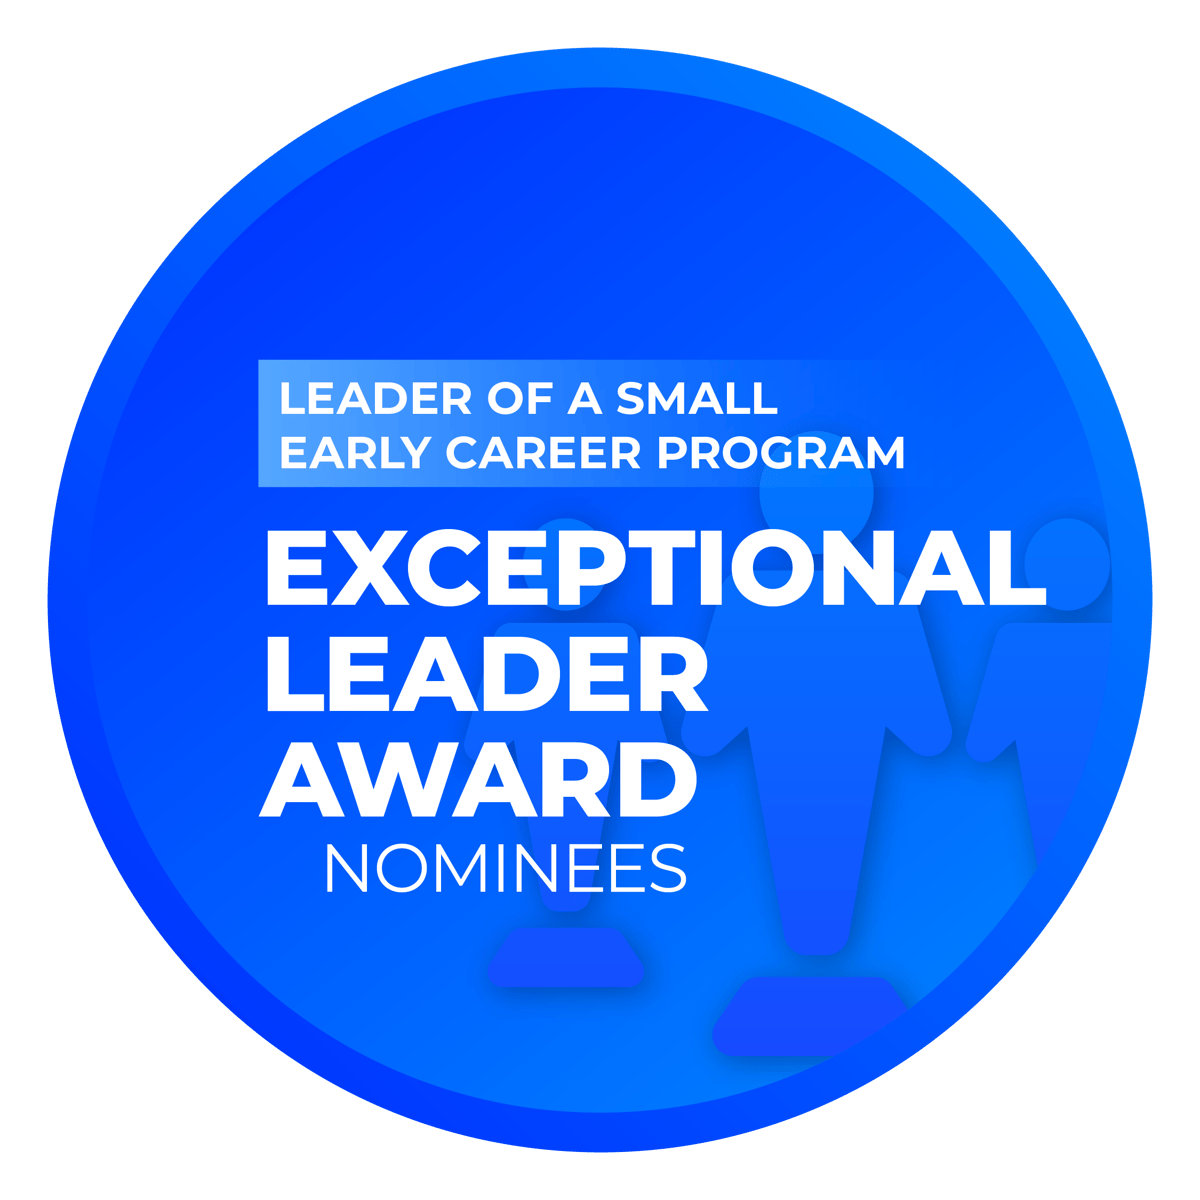 Exceptional Leader Award: Small Early Career Program Nominees